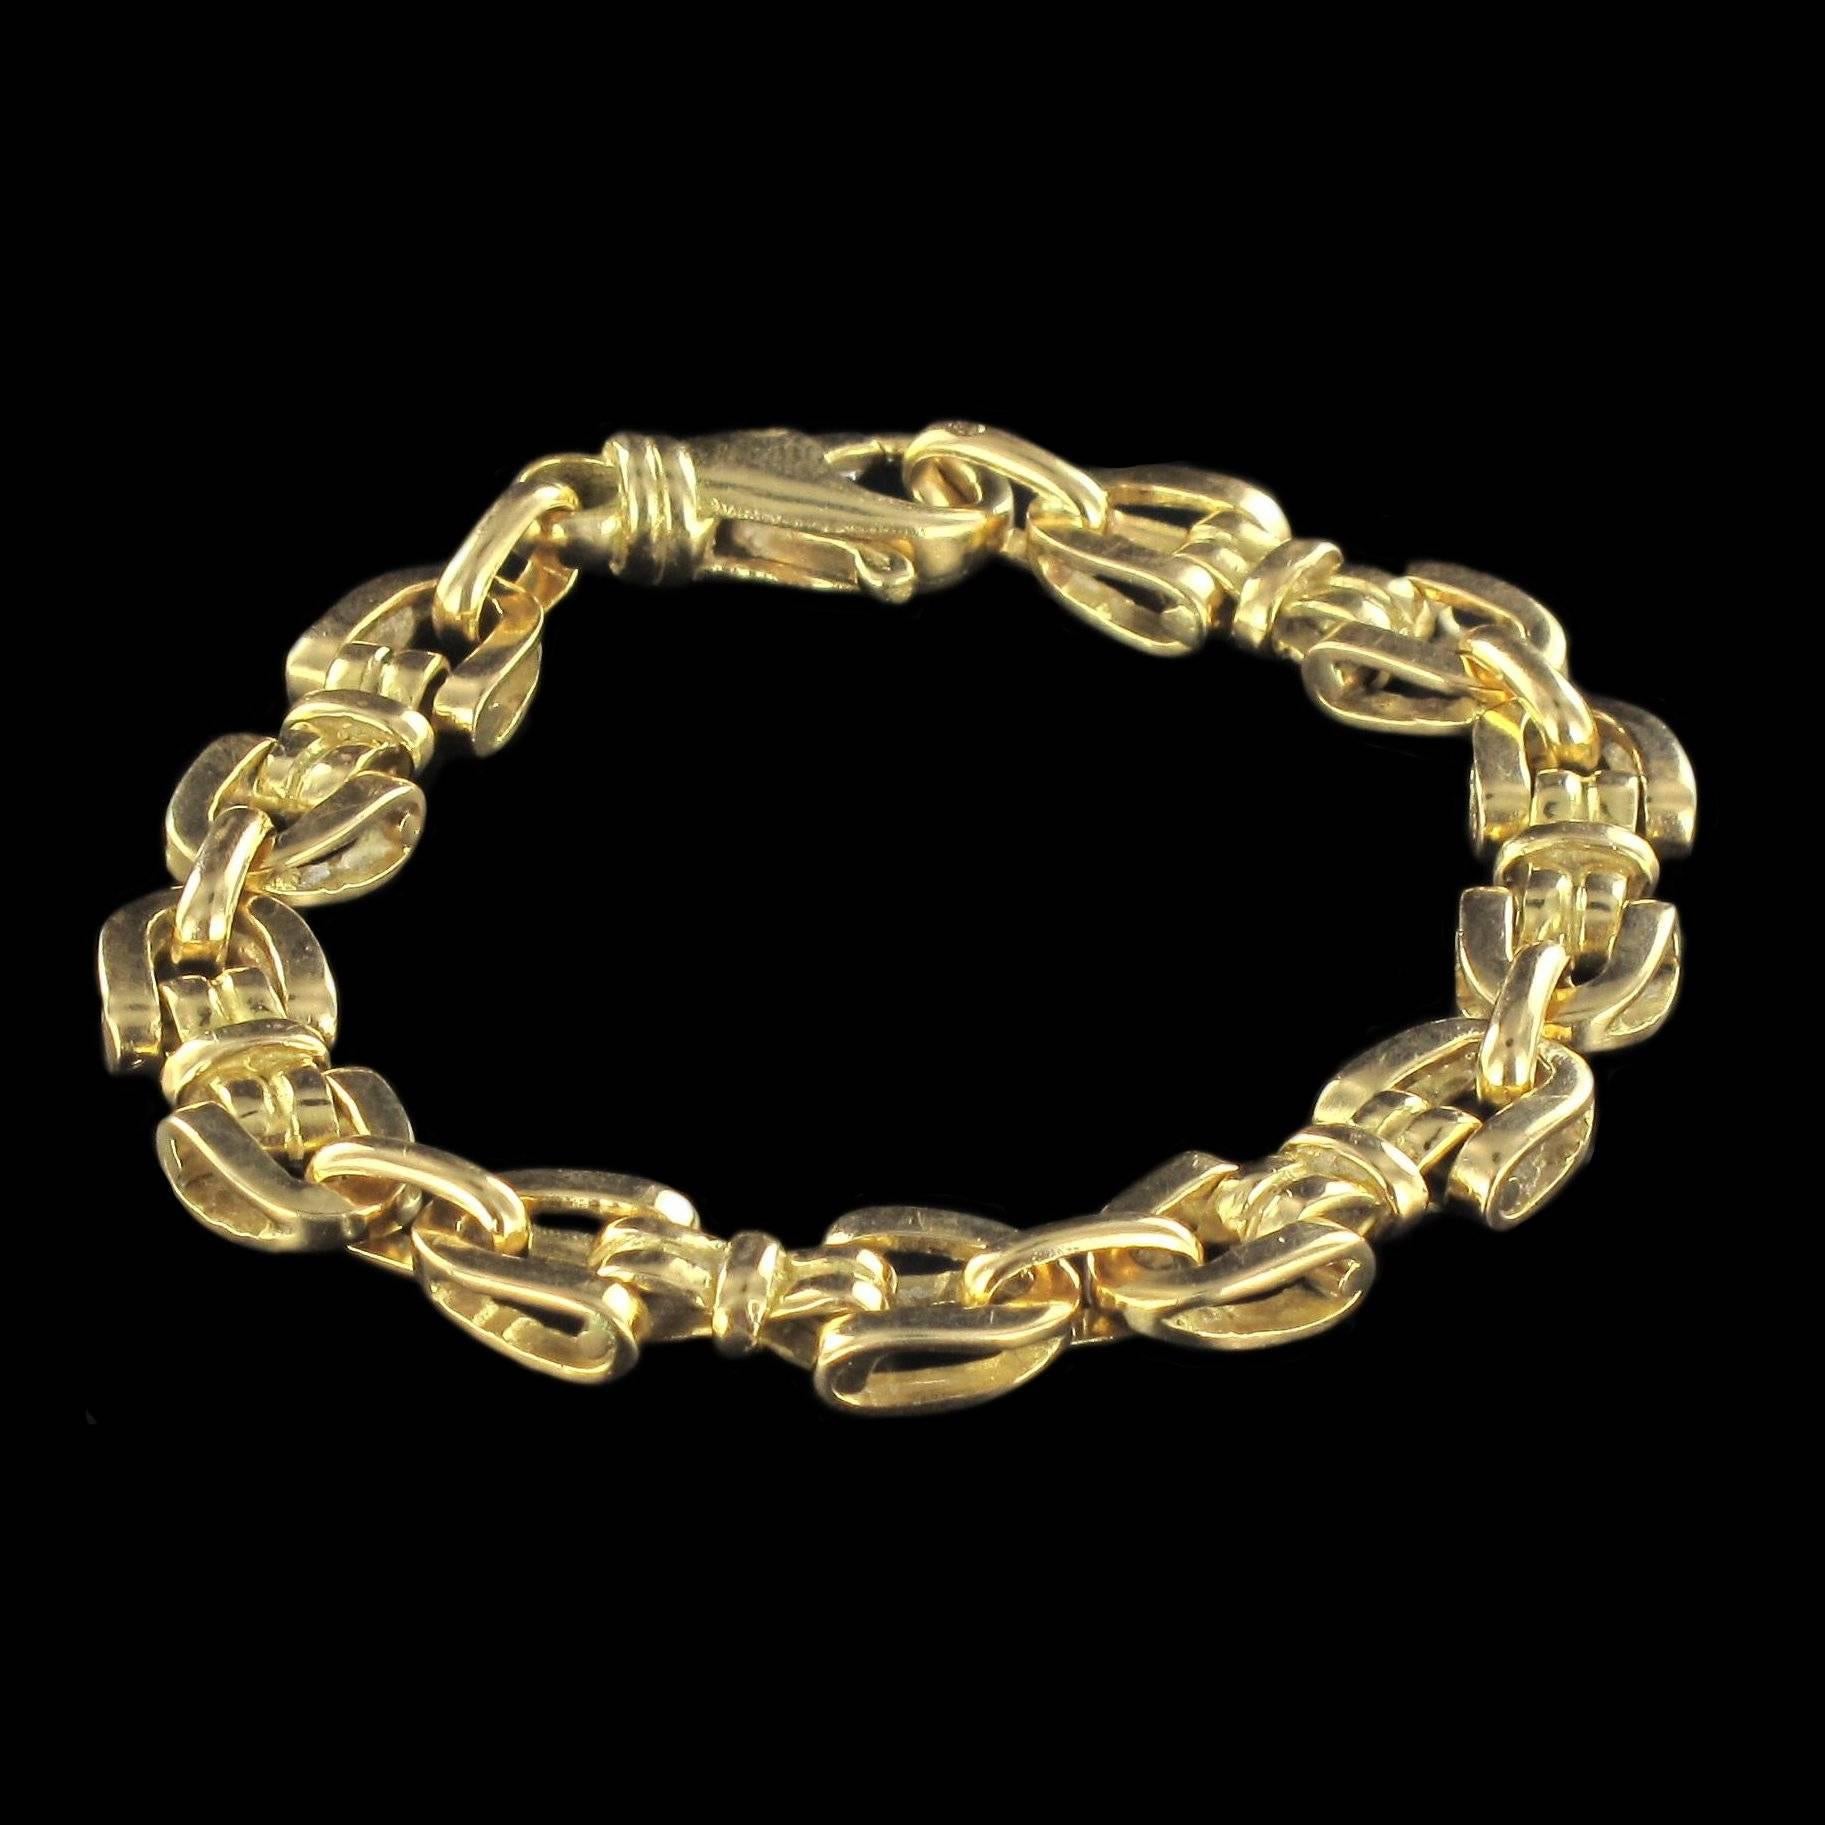 Bracelet in 18 carat yellow gold, eagle head hallmark. 

Composed of 12 motifs in the form of stirrups separated by a gold ring at one end and a bow at the other. This bracelet features a lobster claw clasp. 

Length: 18.2 cm, width at widest: